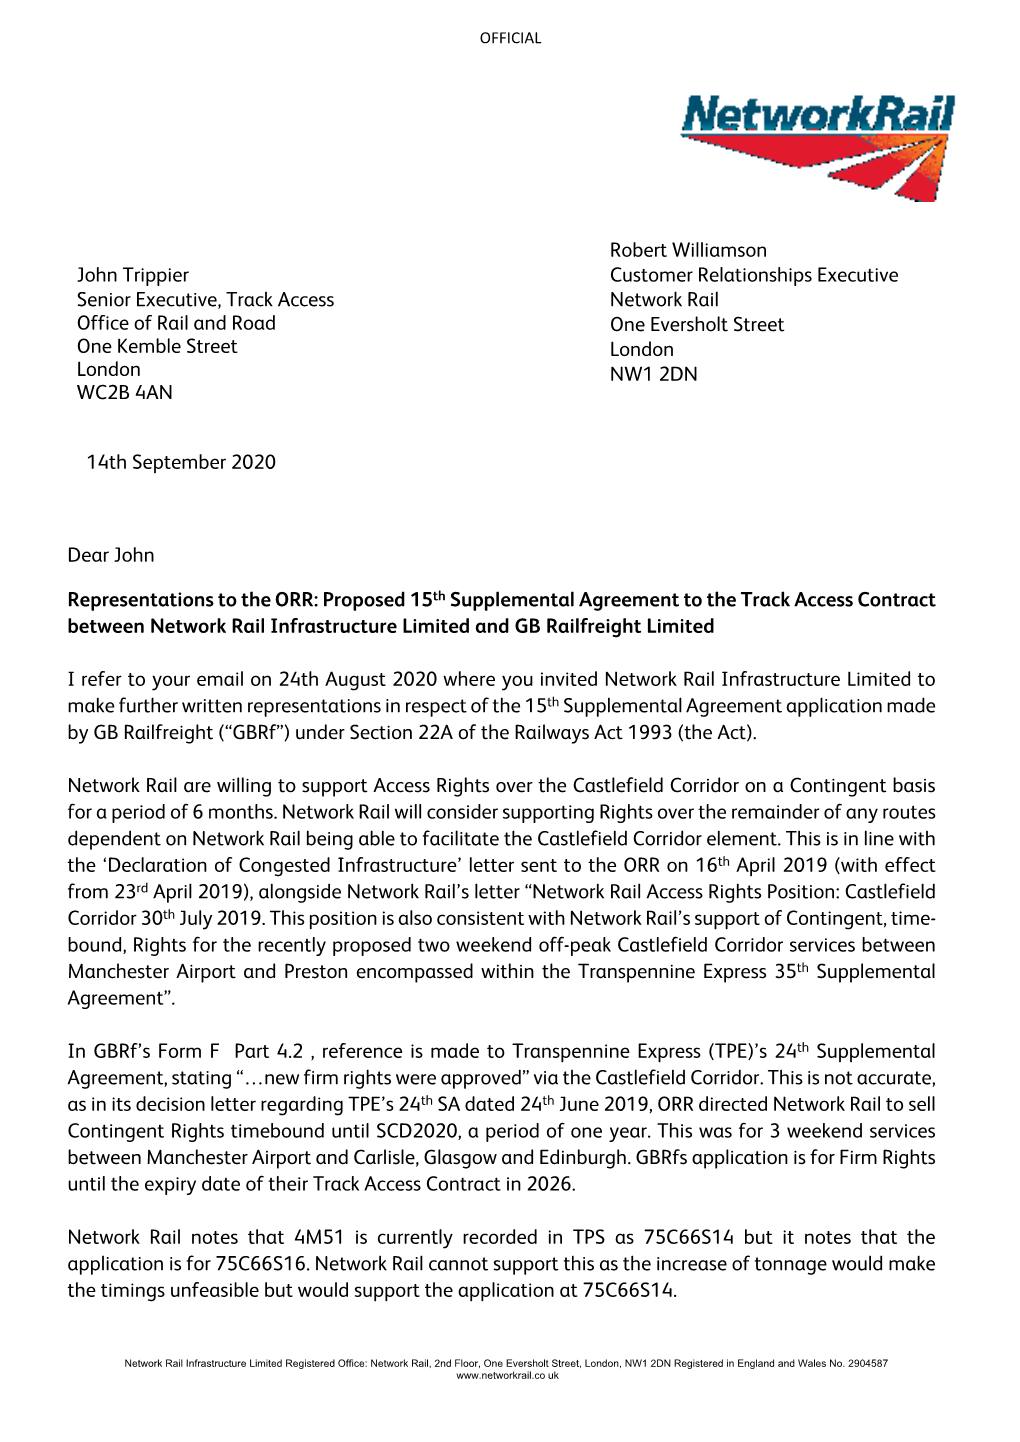 GB Railfreight Limited 15Th Supplemental Agreement